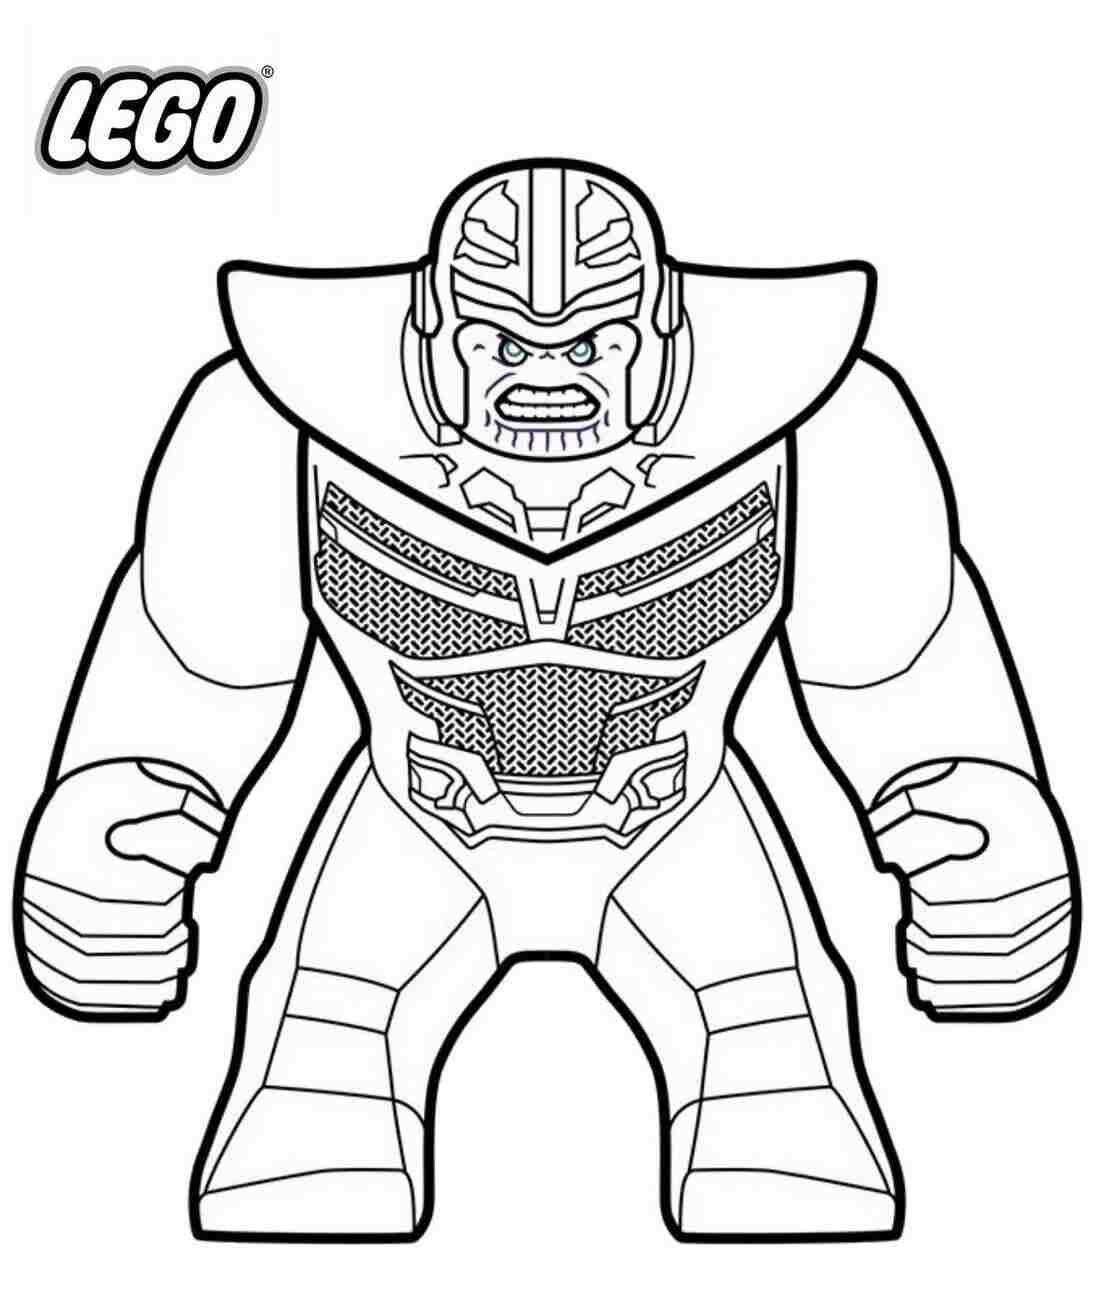 Thanos from the Avengers Endgame in Lego version Coloring Pages ...